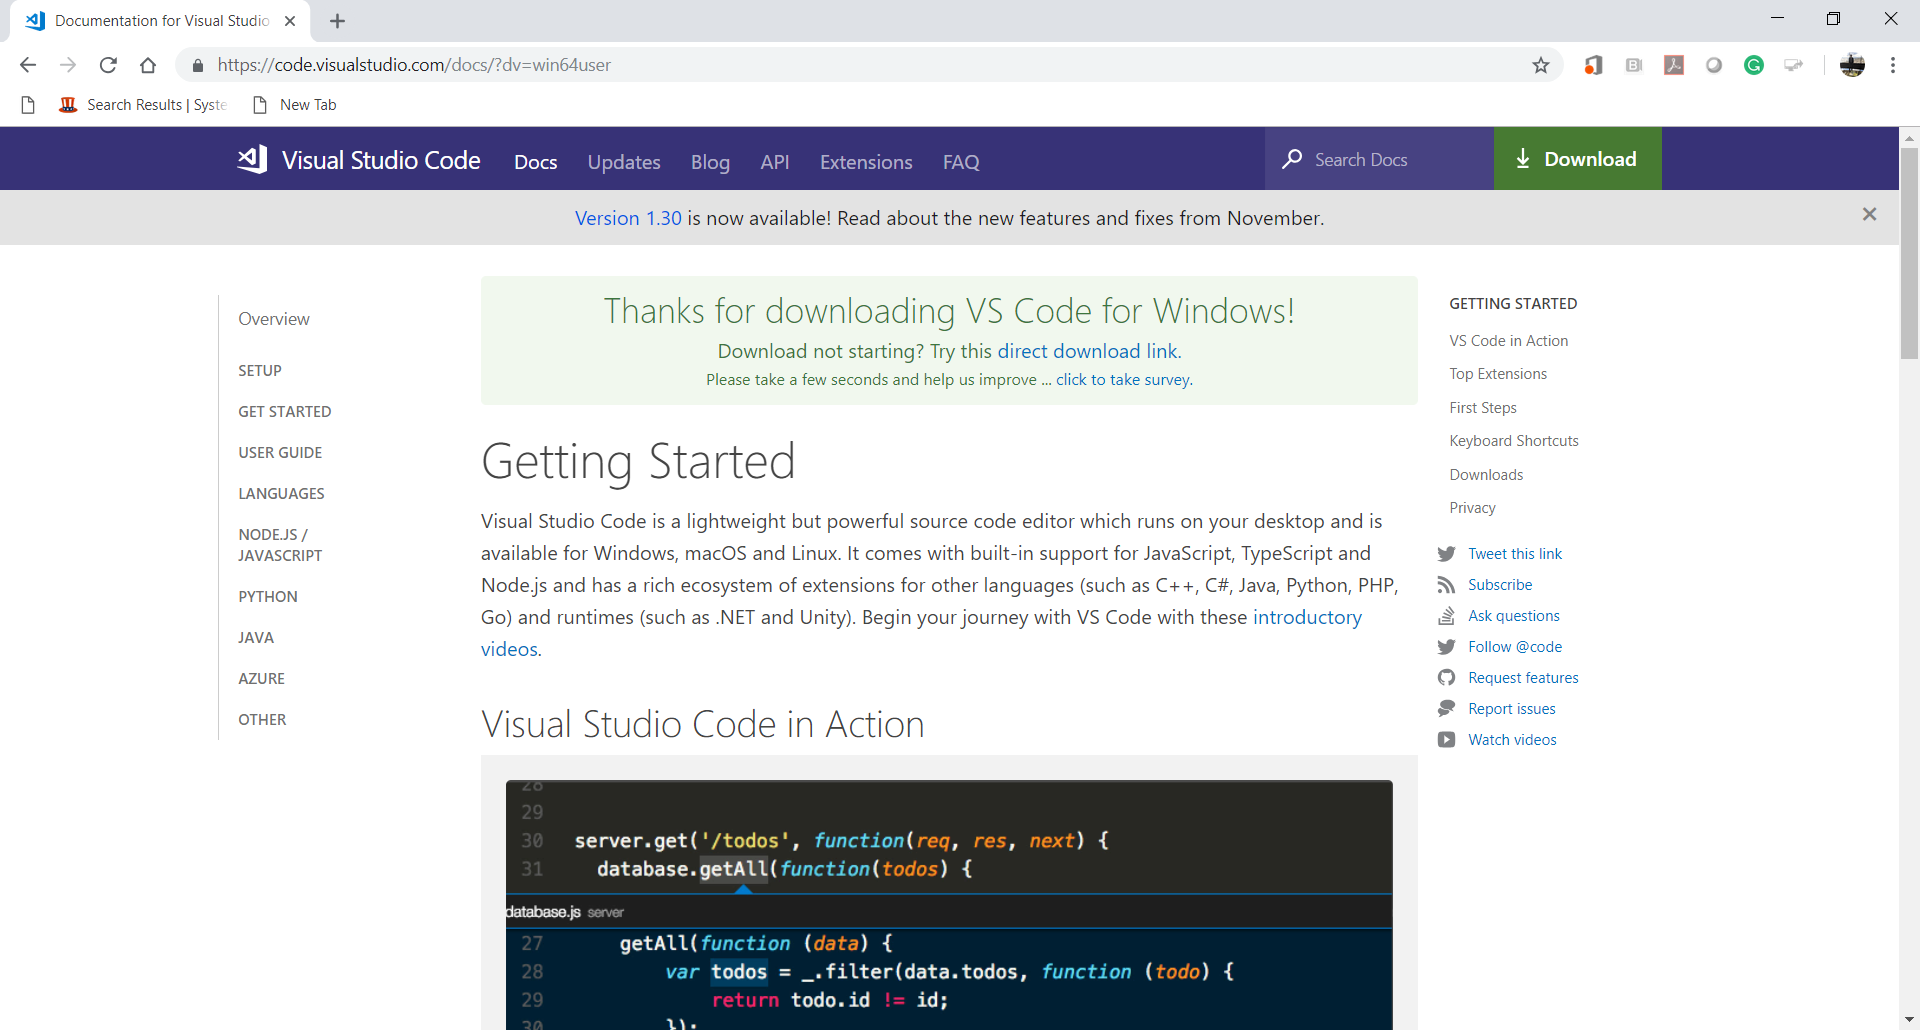 vscode_download_btn_clicked